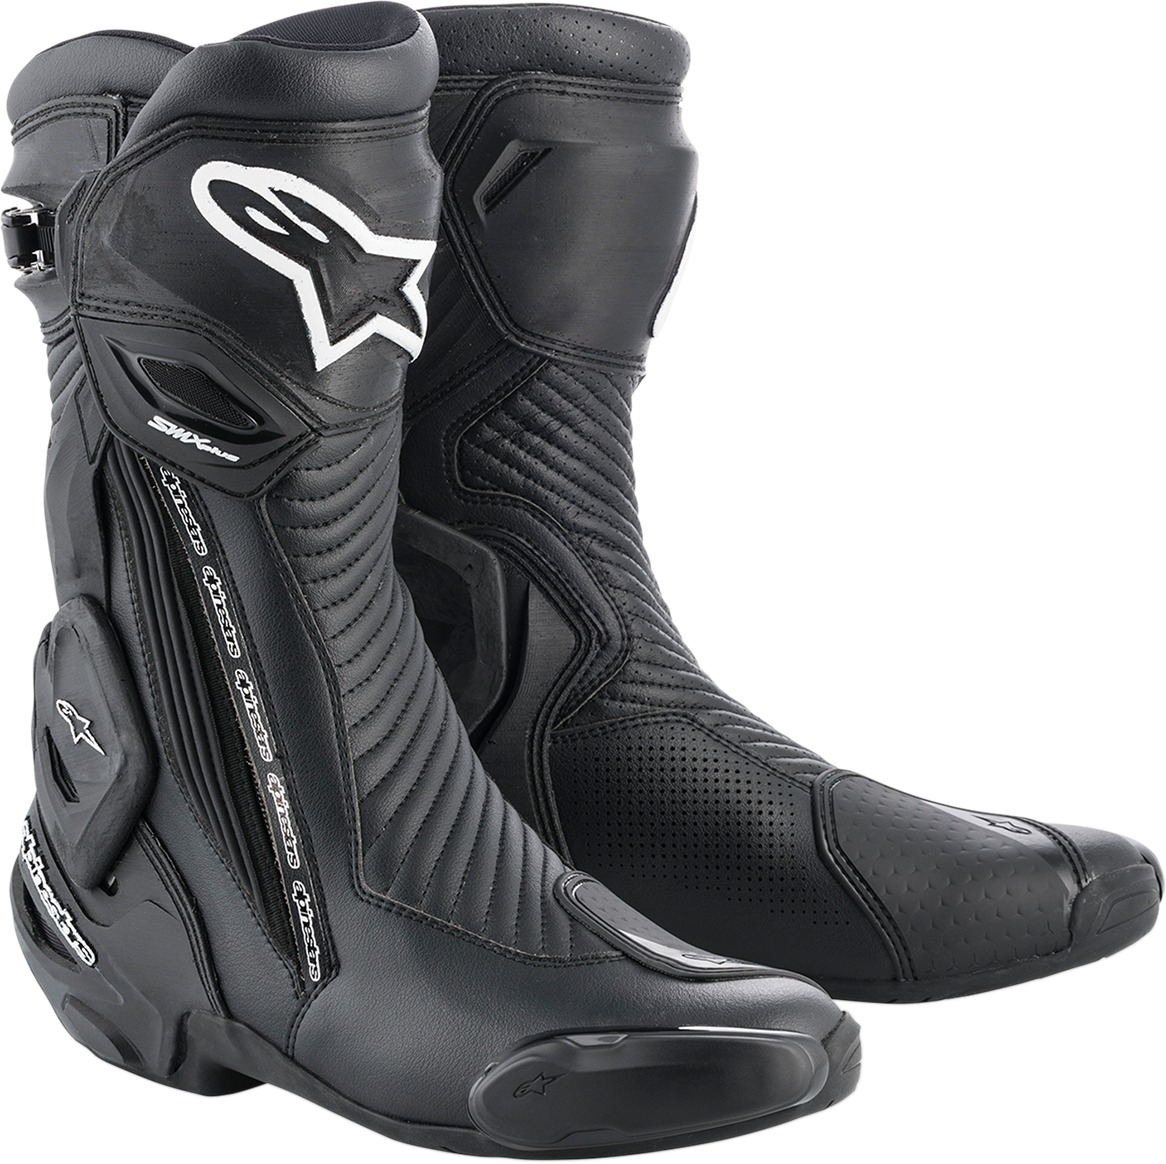 SMX Plus Street Riding Boots Black US 7.5 - Click Image to Close